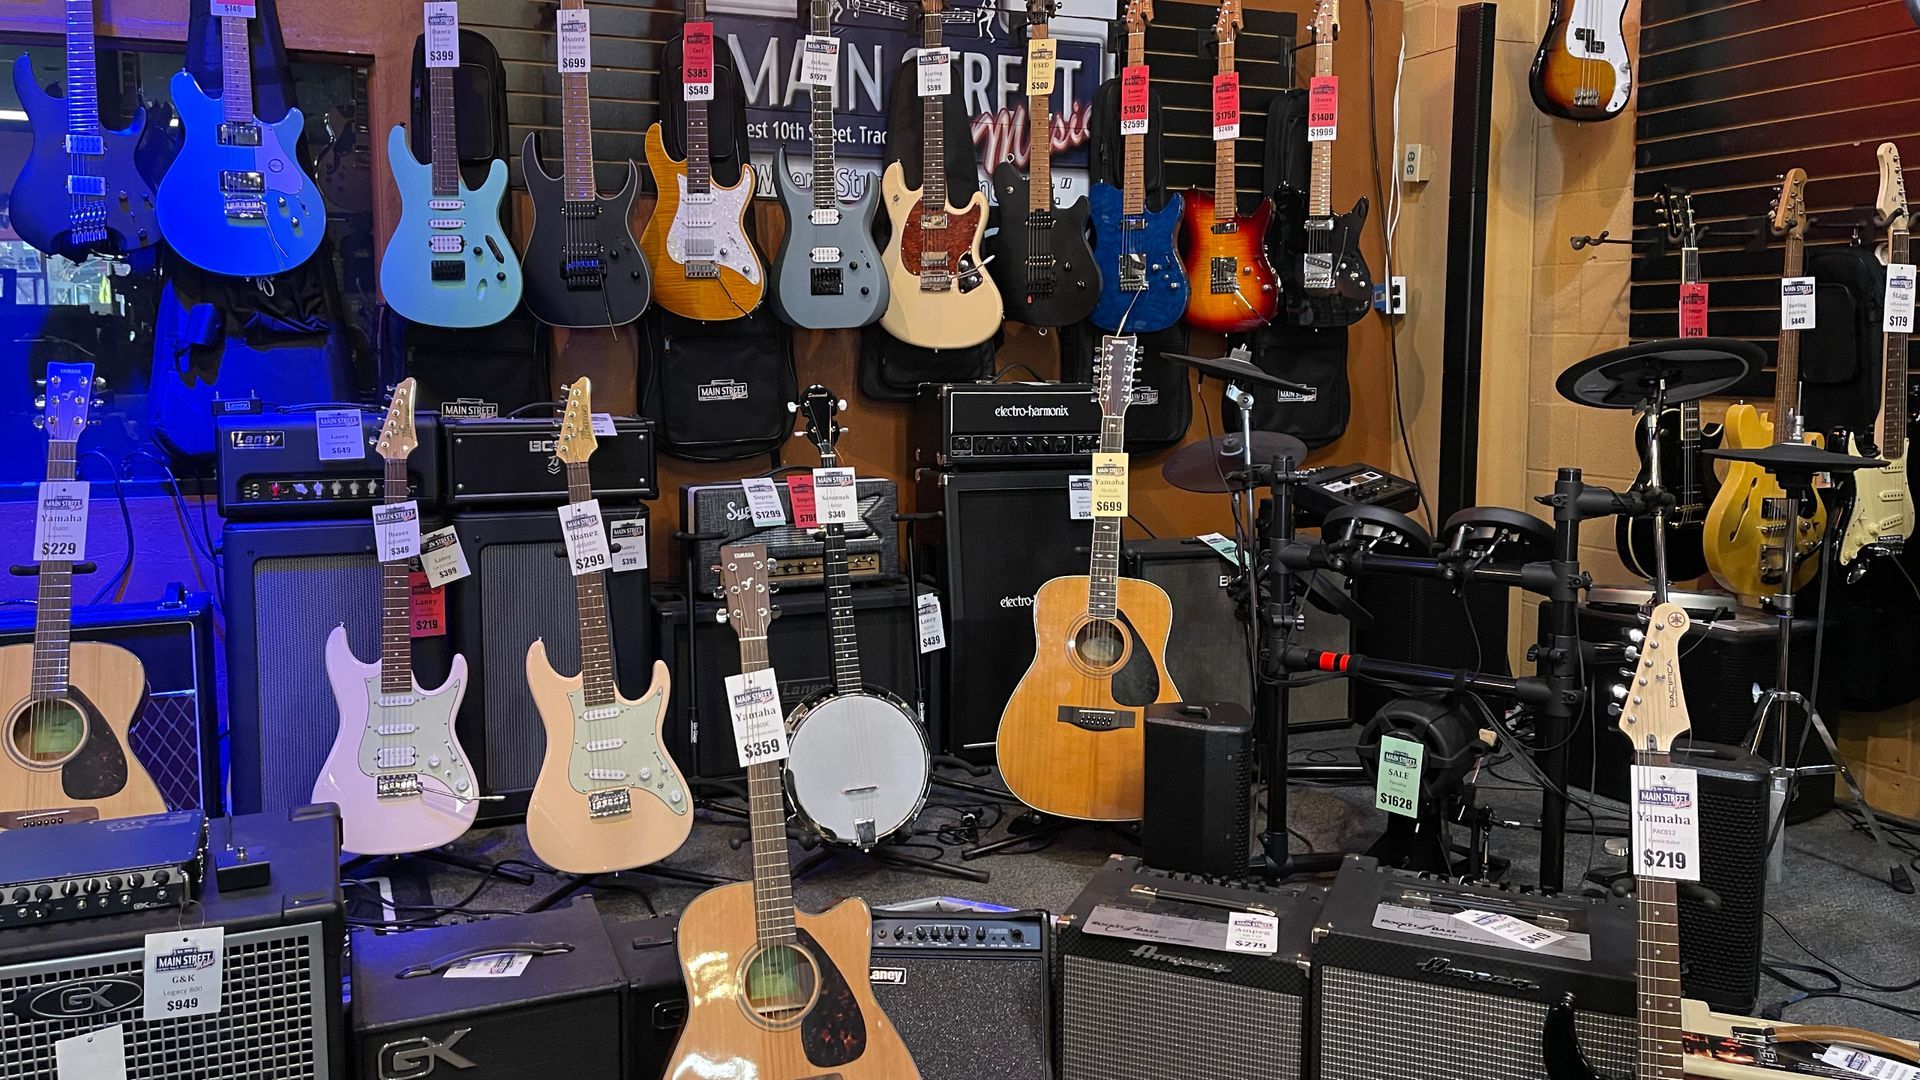 A bunch of guitars are hanging on a wall in a store.